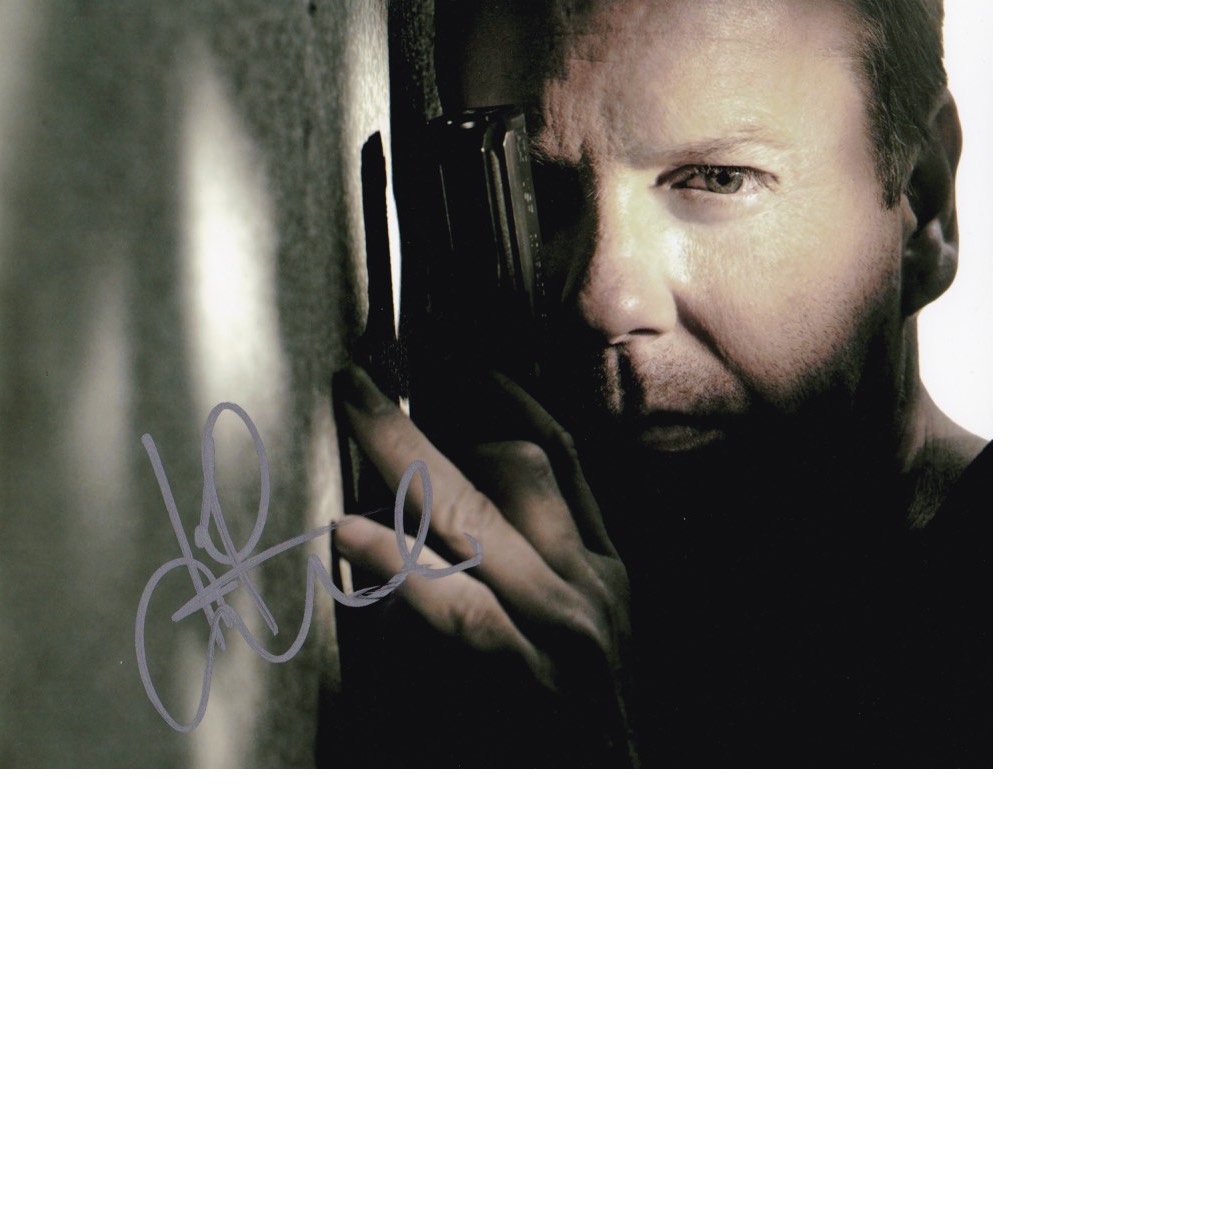 Kiefer Sutherland Signed 8 x 10 inch Photo. Good Condition. All signed pieces come with a